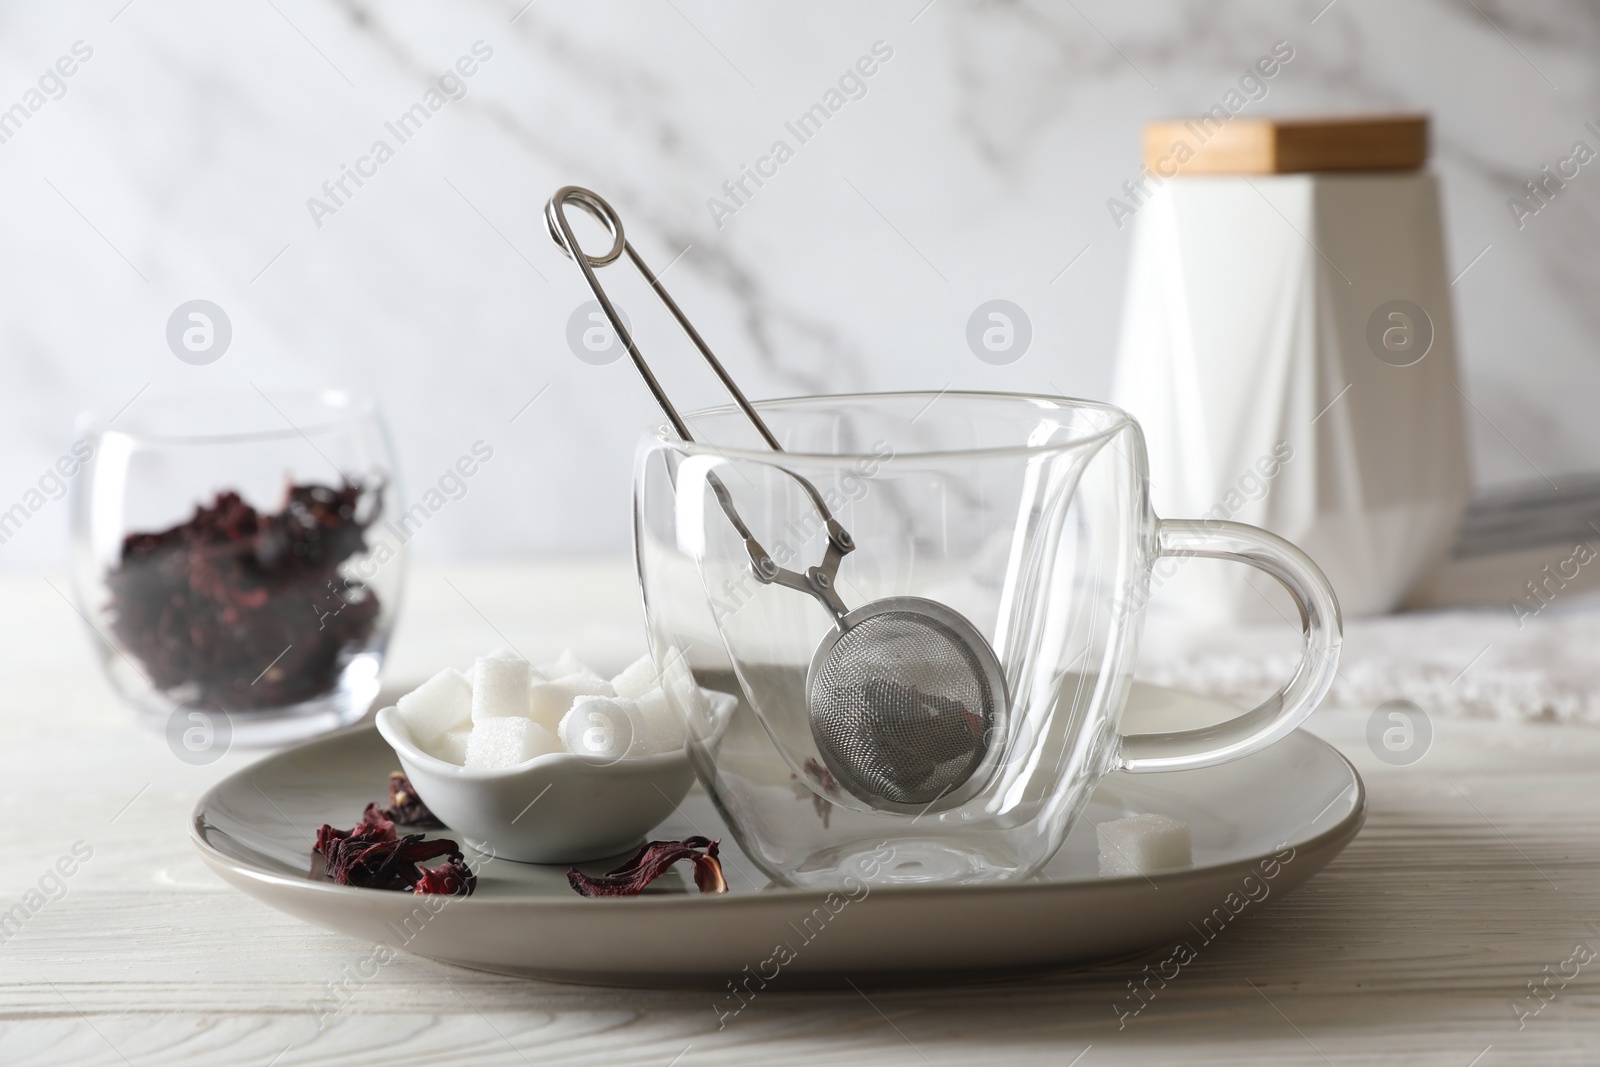 Photo of Making hibiscus tea. Cup with infuser, sugar cubes and dried roselle petals on white wooden table